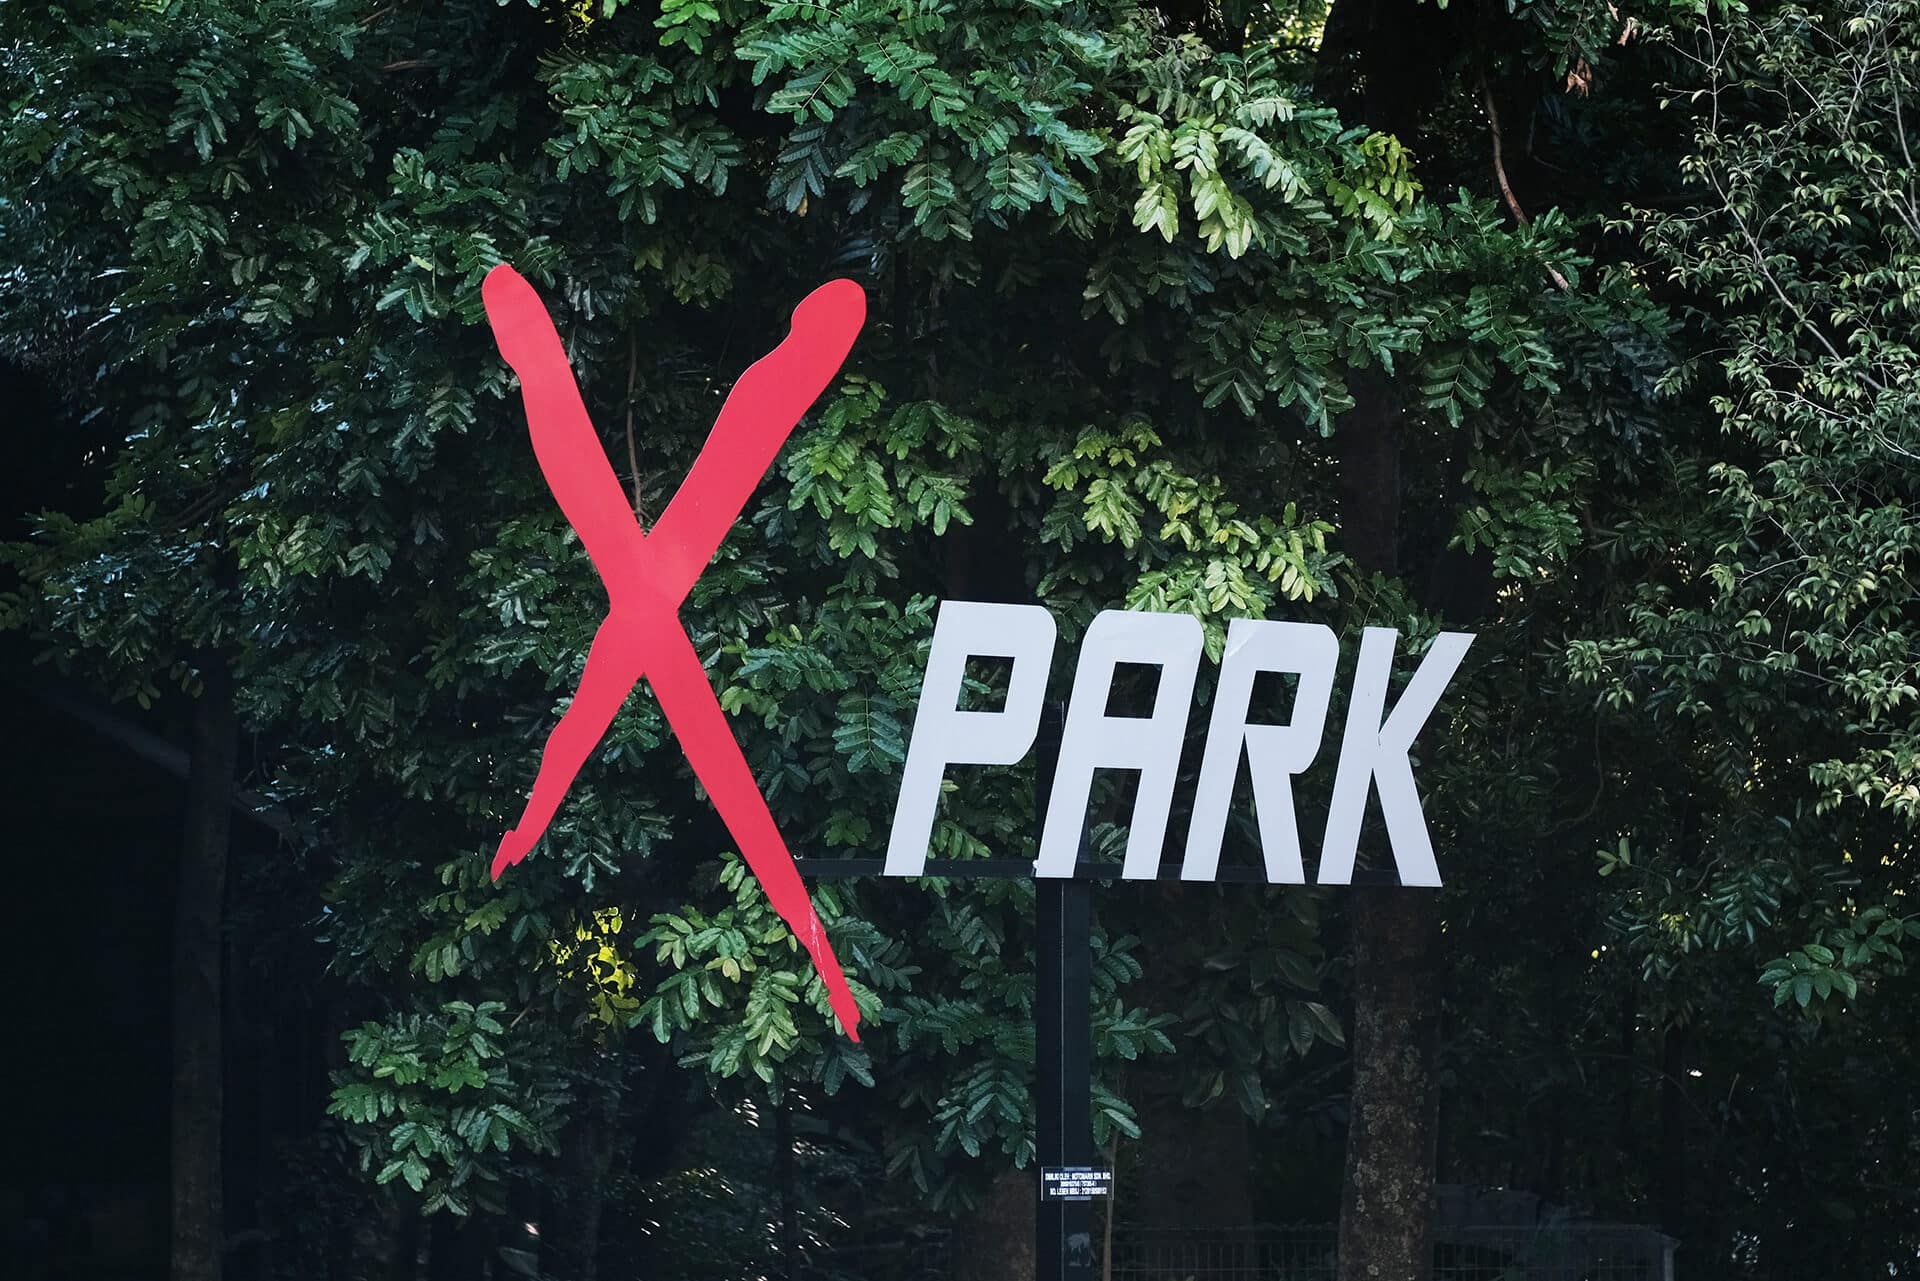 X Park Sunway South Quay – one of the favourite destinations for a round of futsal!